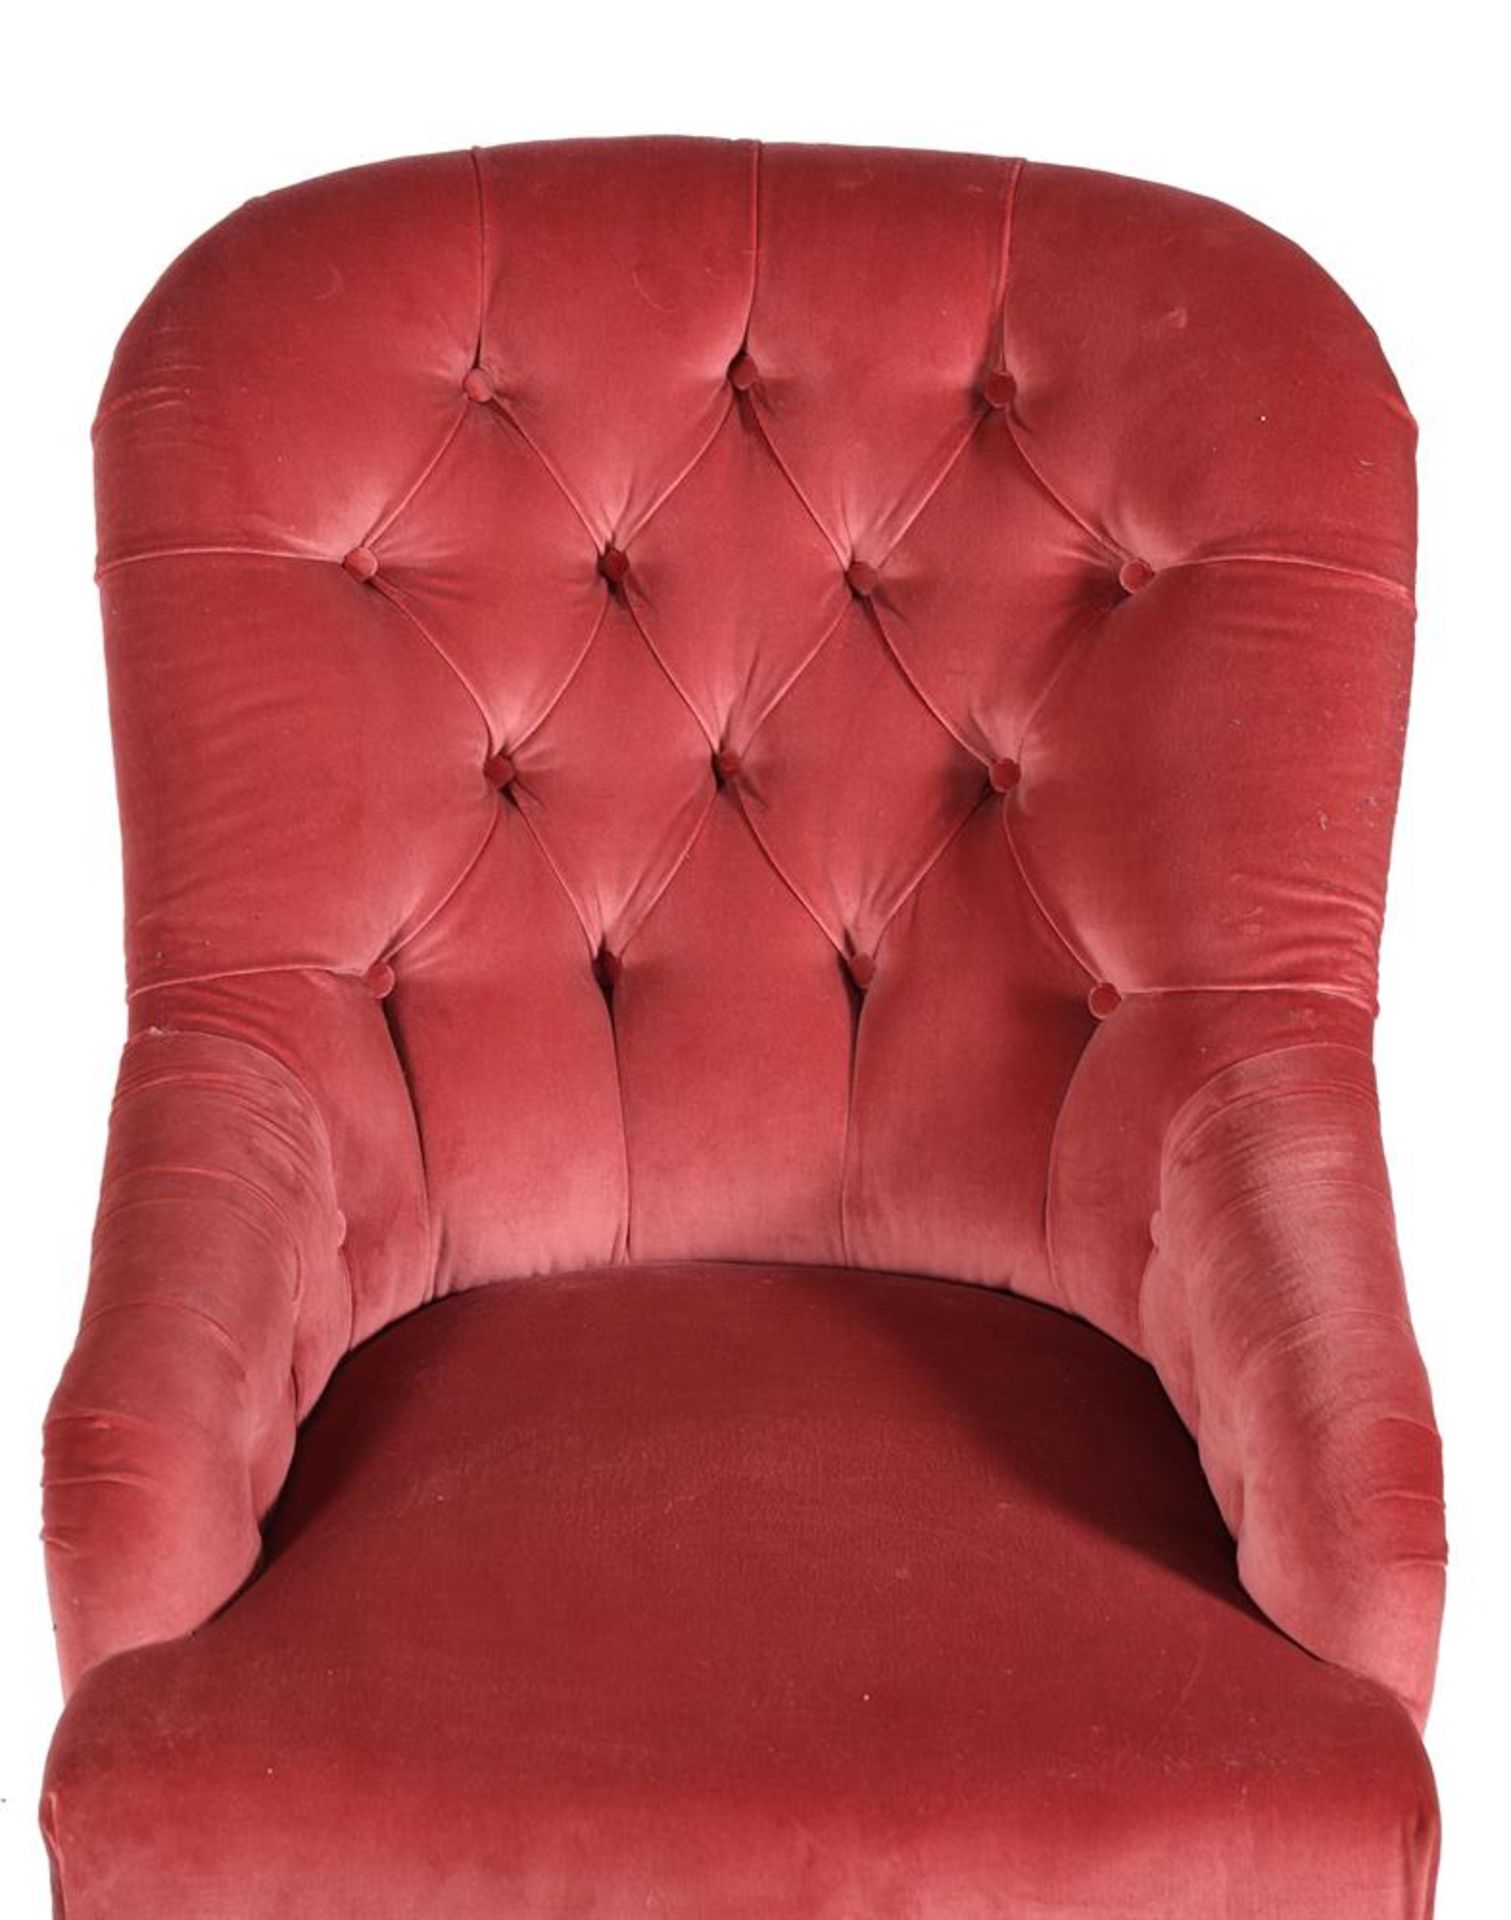 A PAIR OF MAHOGANY AND BUTTON UPHOLSTERED ARMCHAIRS, IN VICTORIAN STYLE, 20TH CENTURY - Image 3 of 3